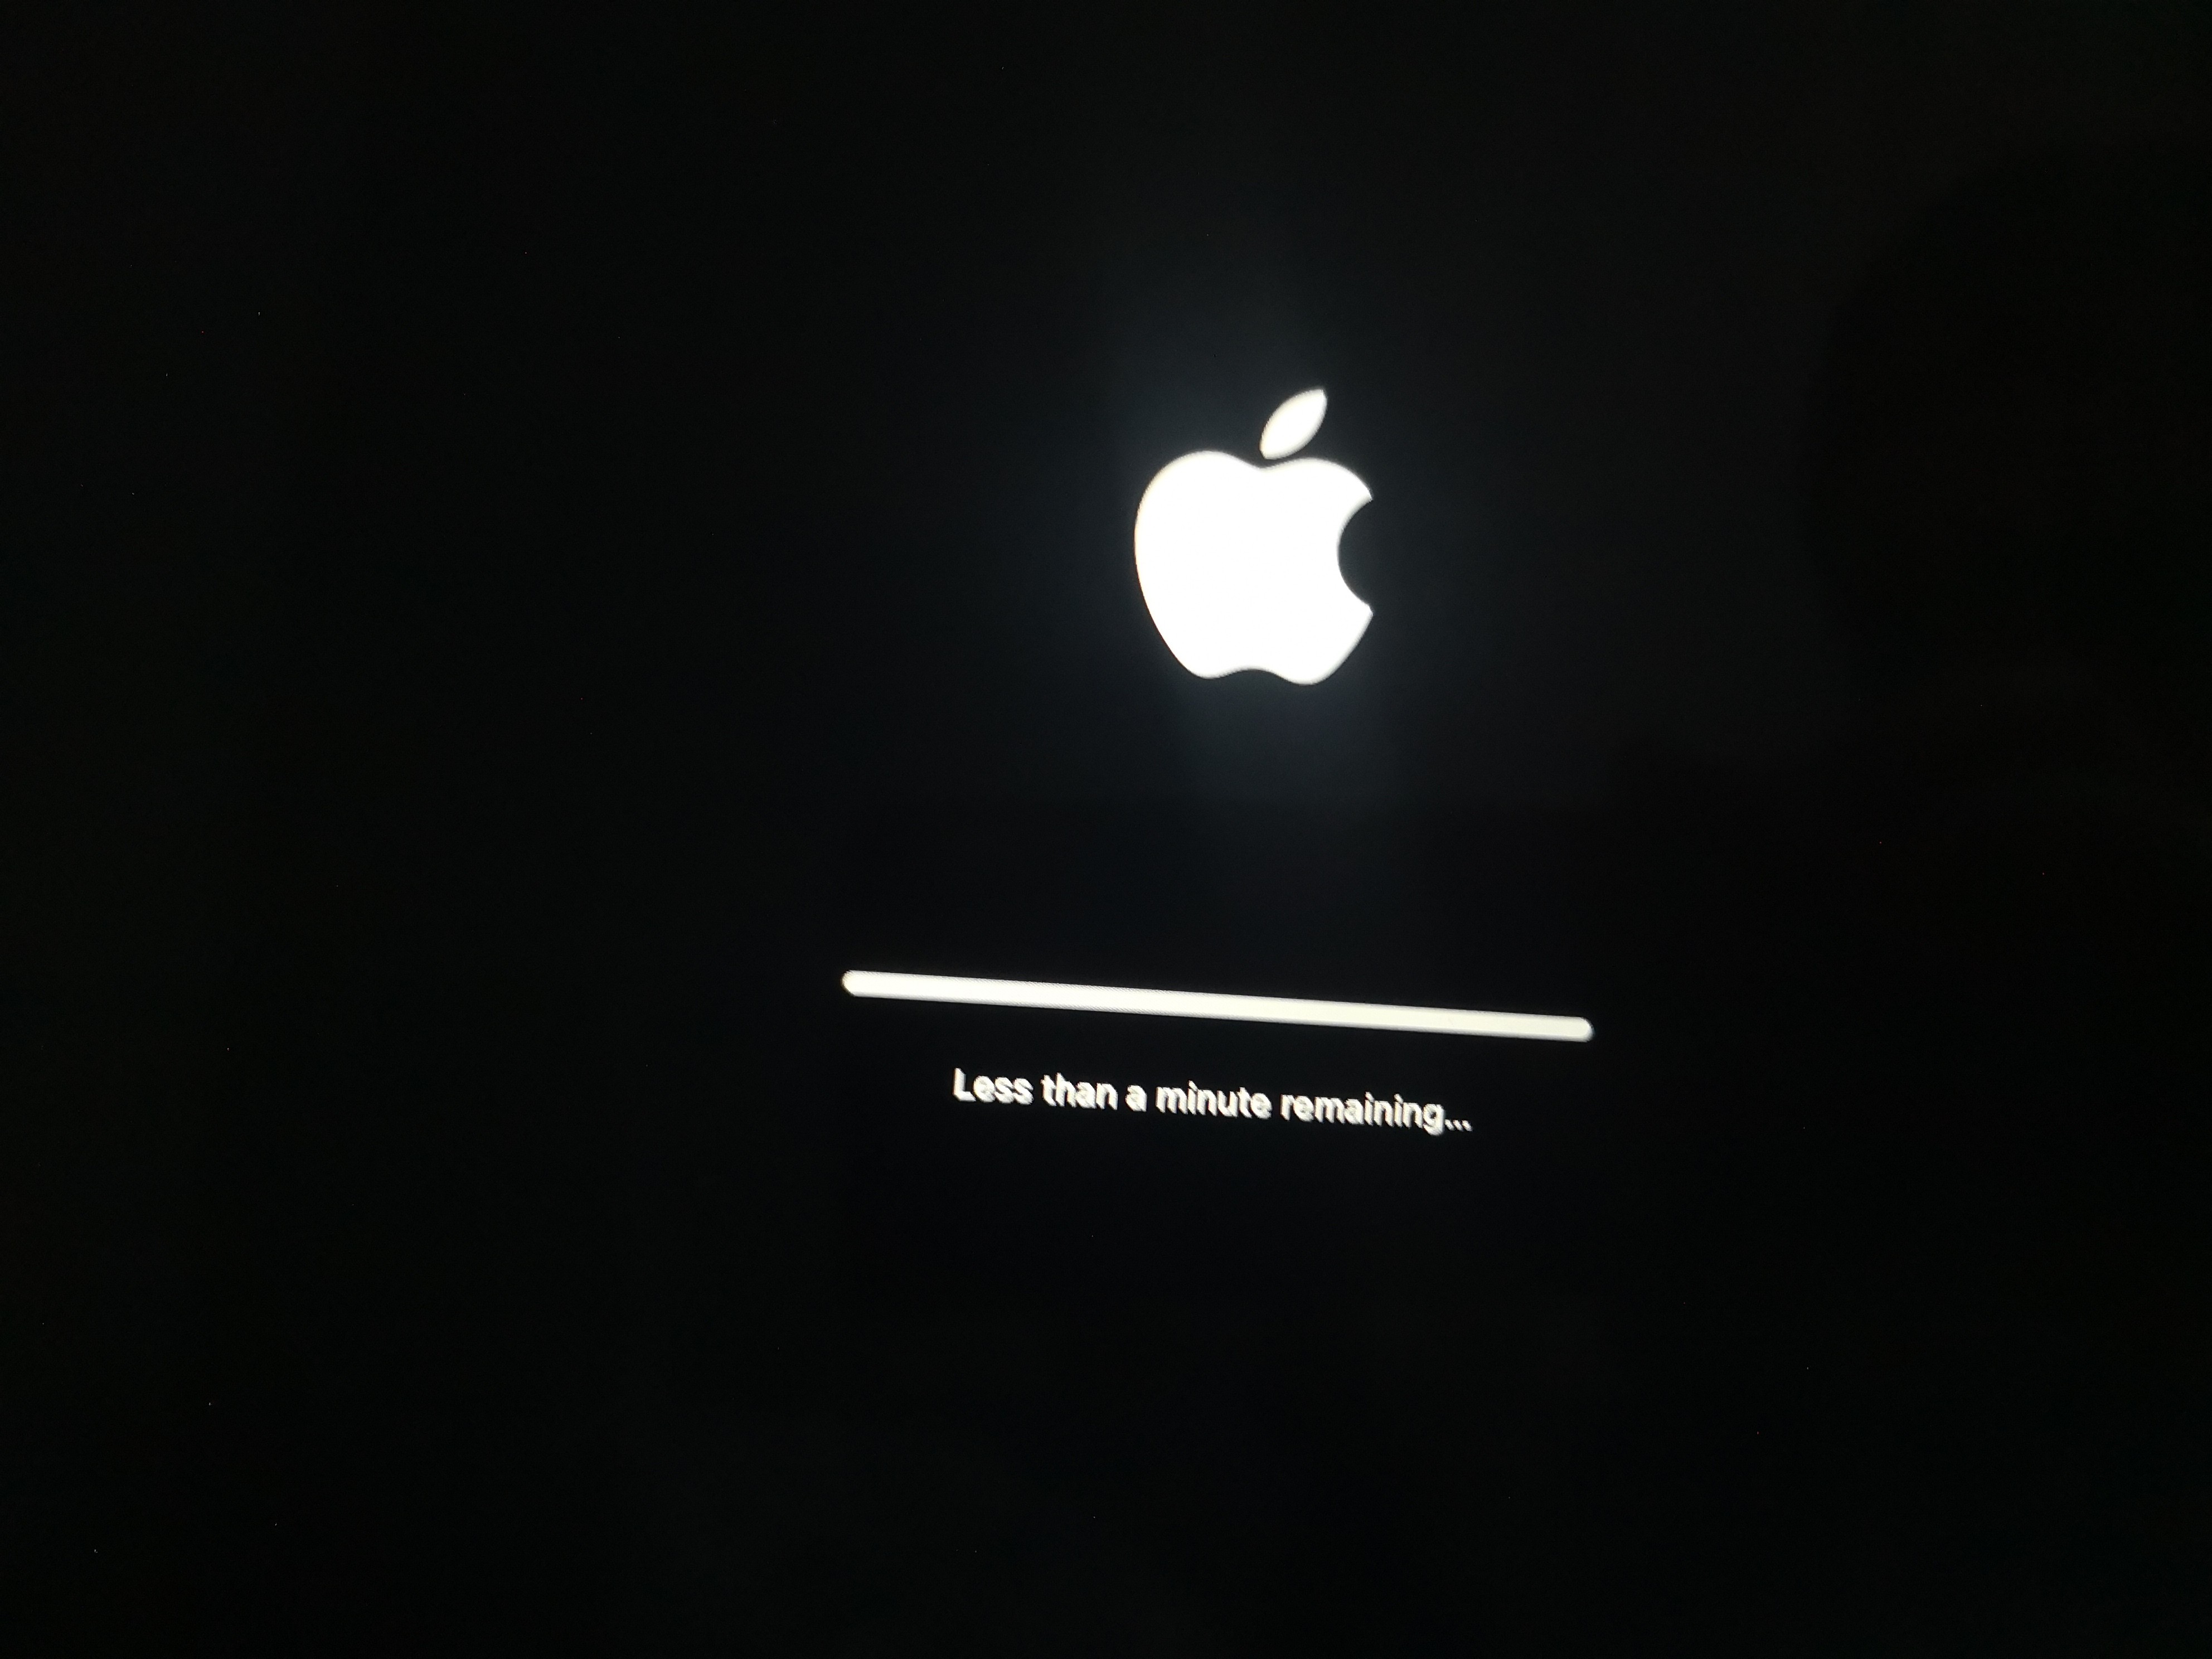 Why Wont My Mac Let Me Reinstall Os X: 9 Potential Solutions